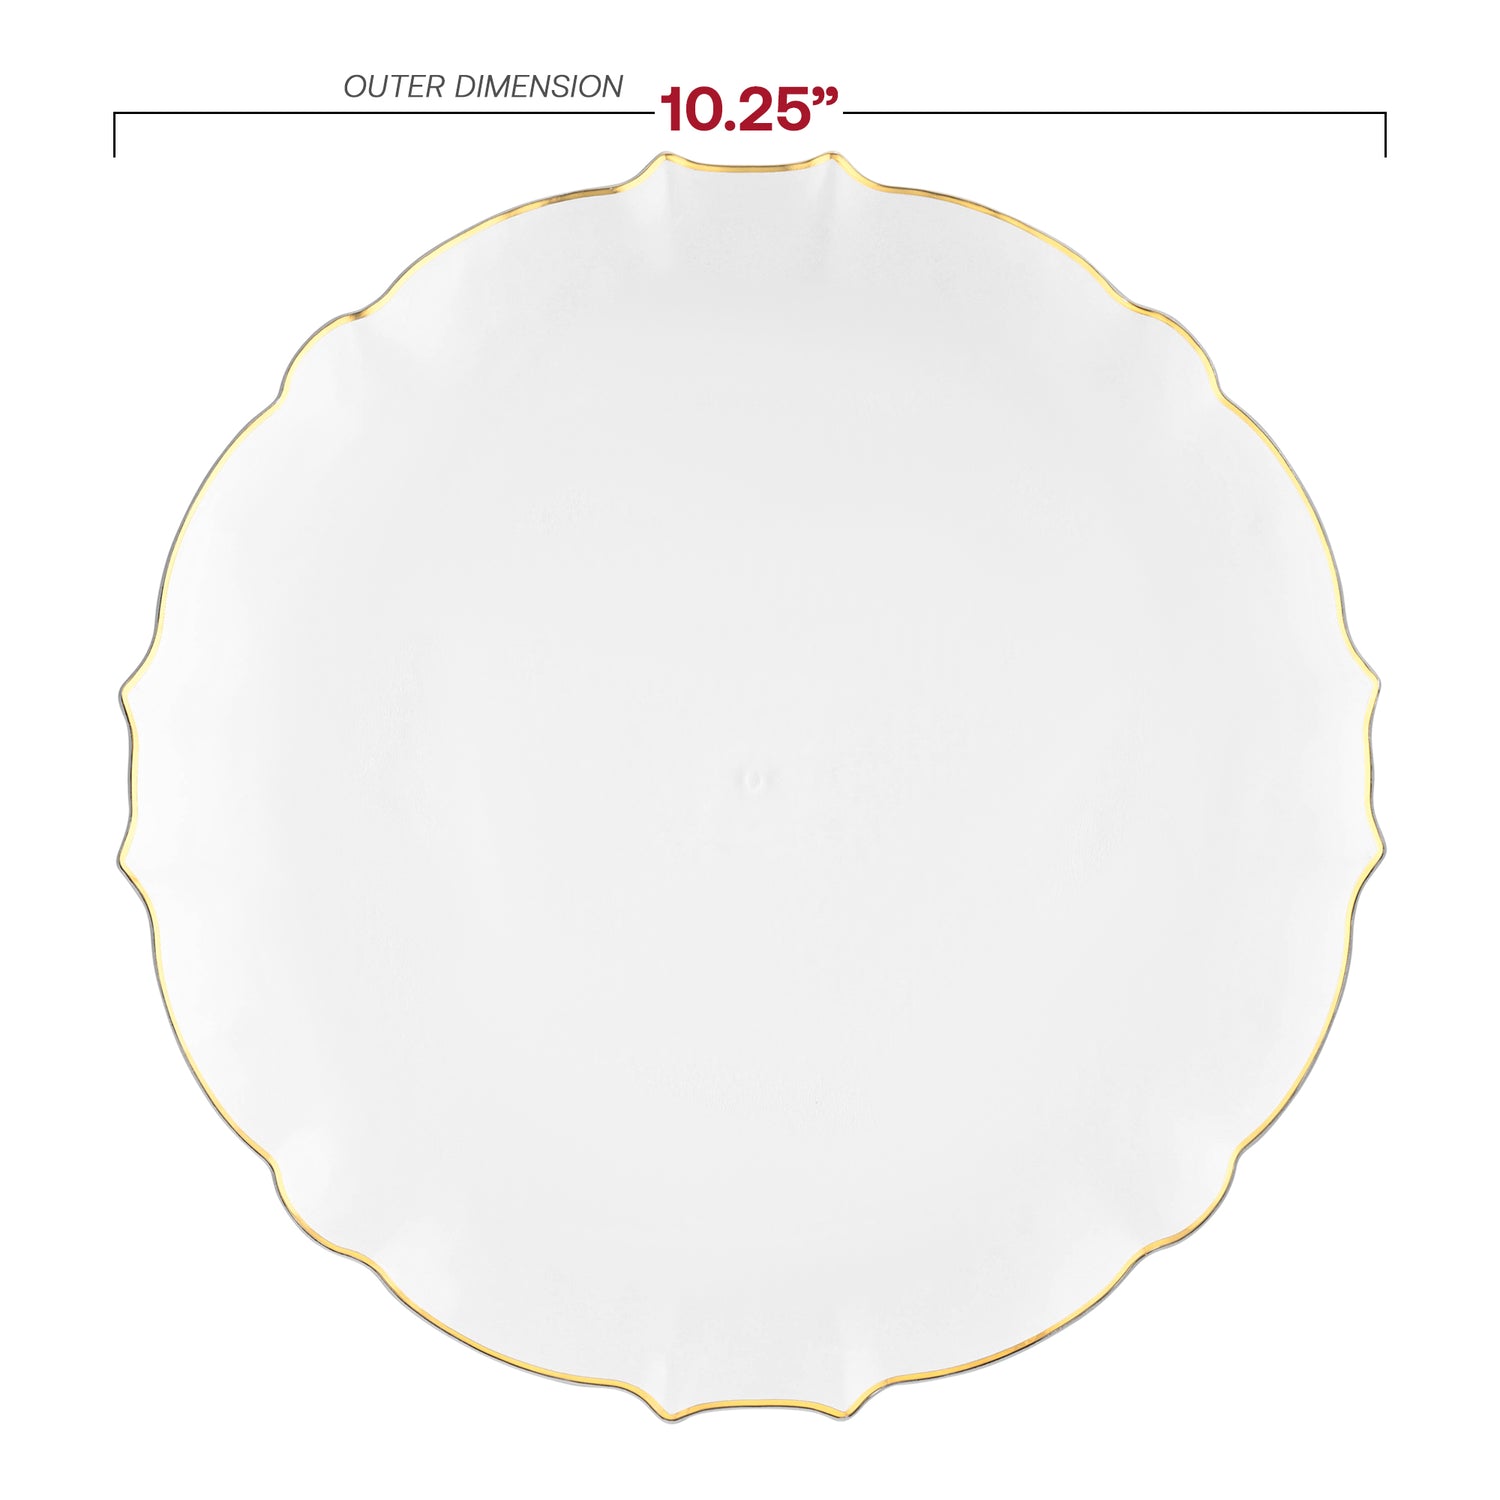 Clear with Gold Rim Round Lotus Plastic Dinner Plates (10.25") Dimension | The Kaya Collection